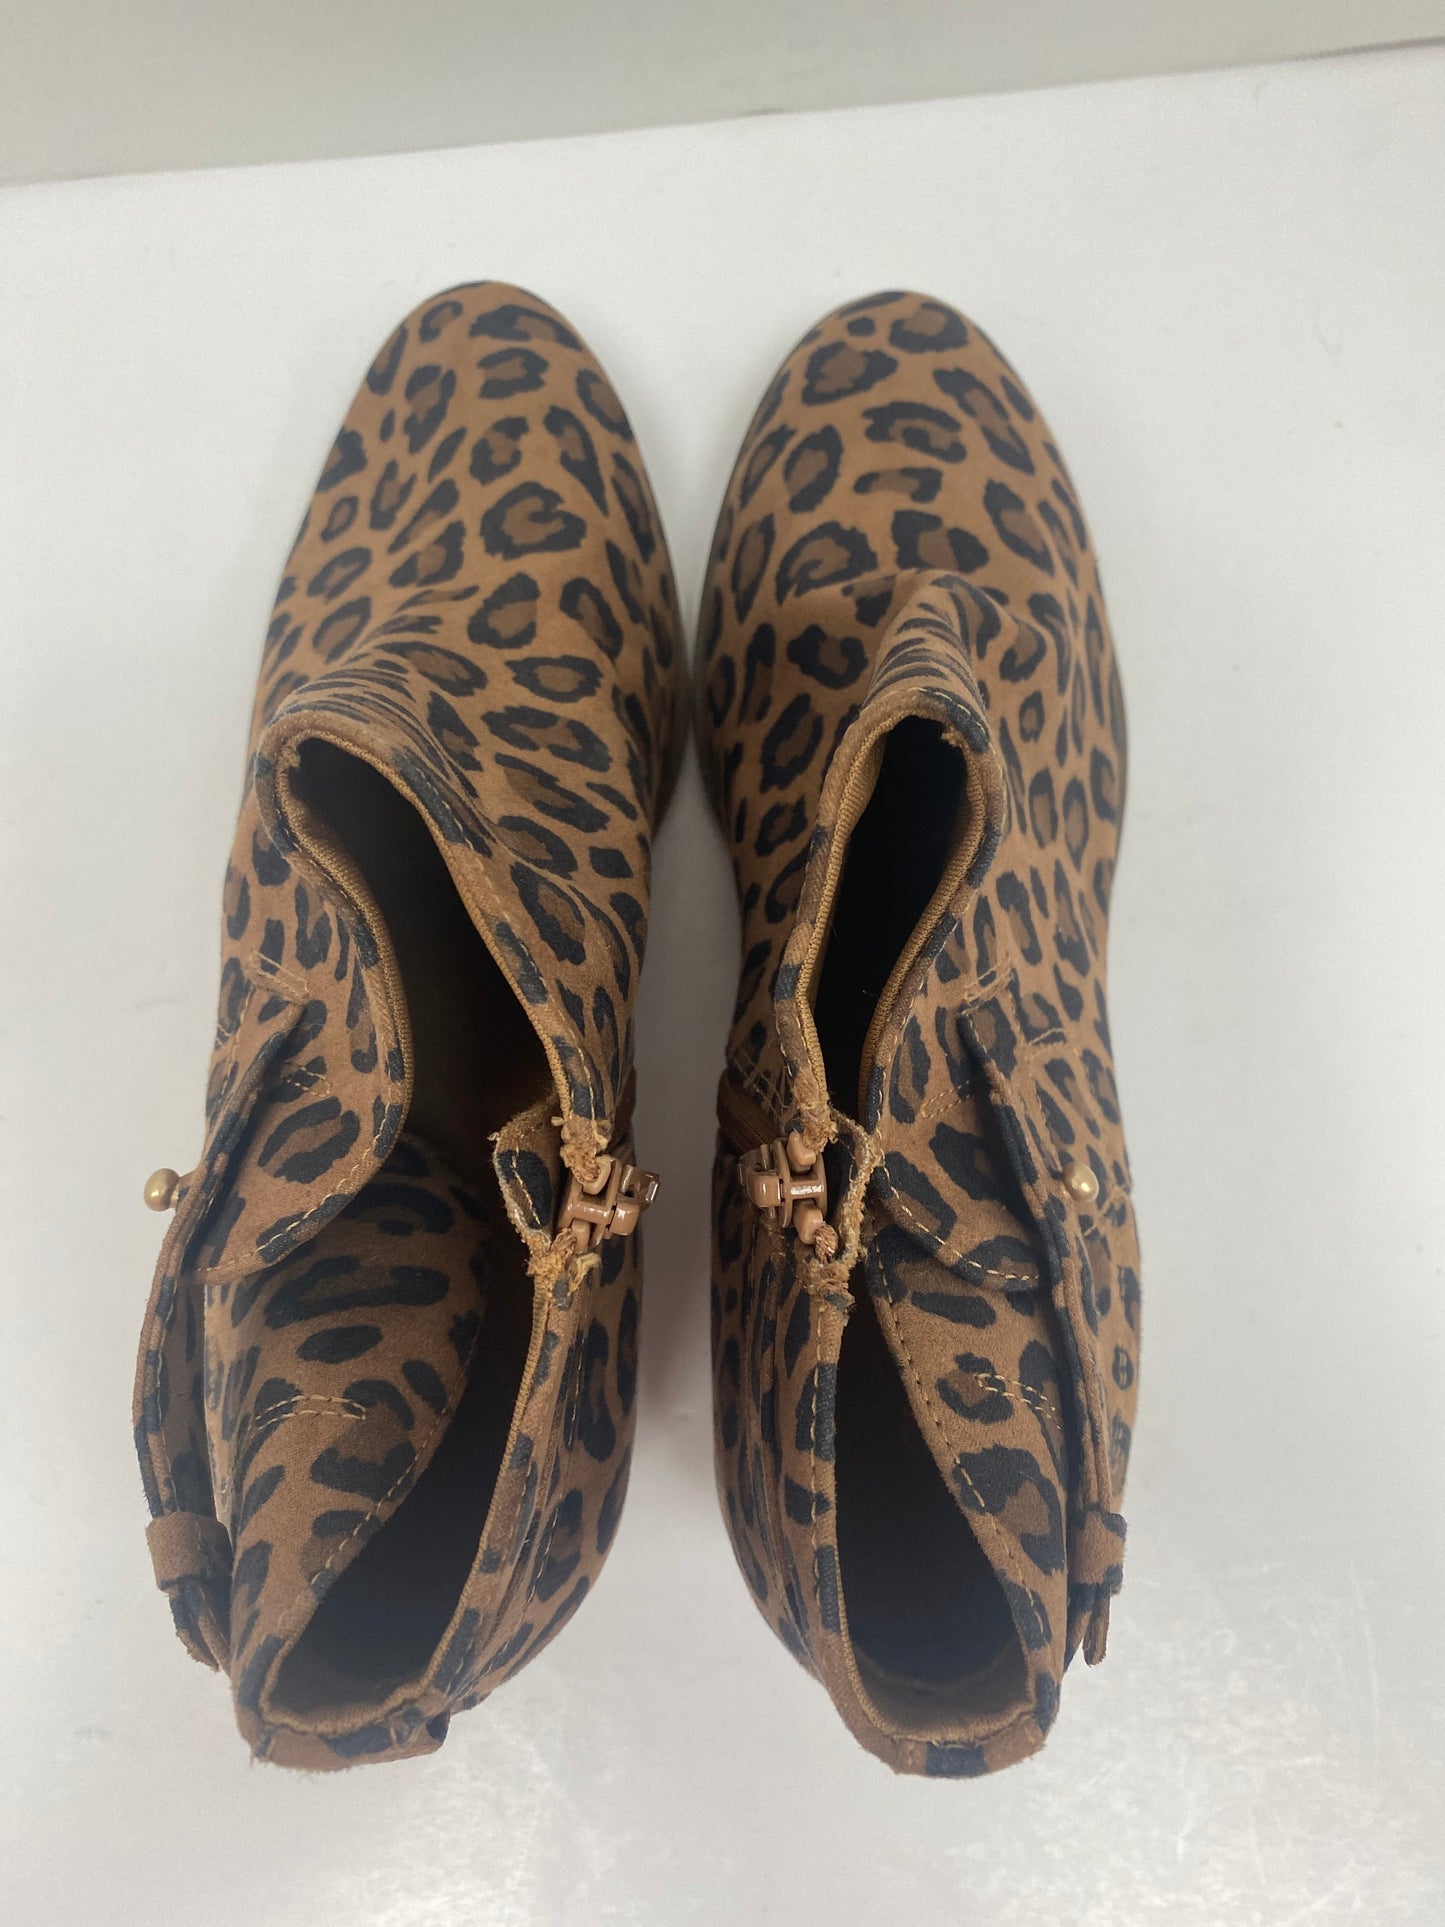 Animal Print Boots Ankle Heels Old Navy, Size 8